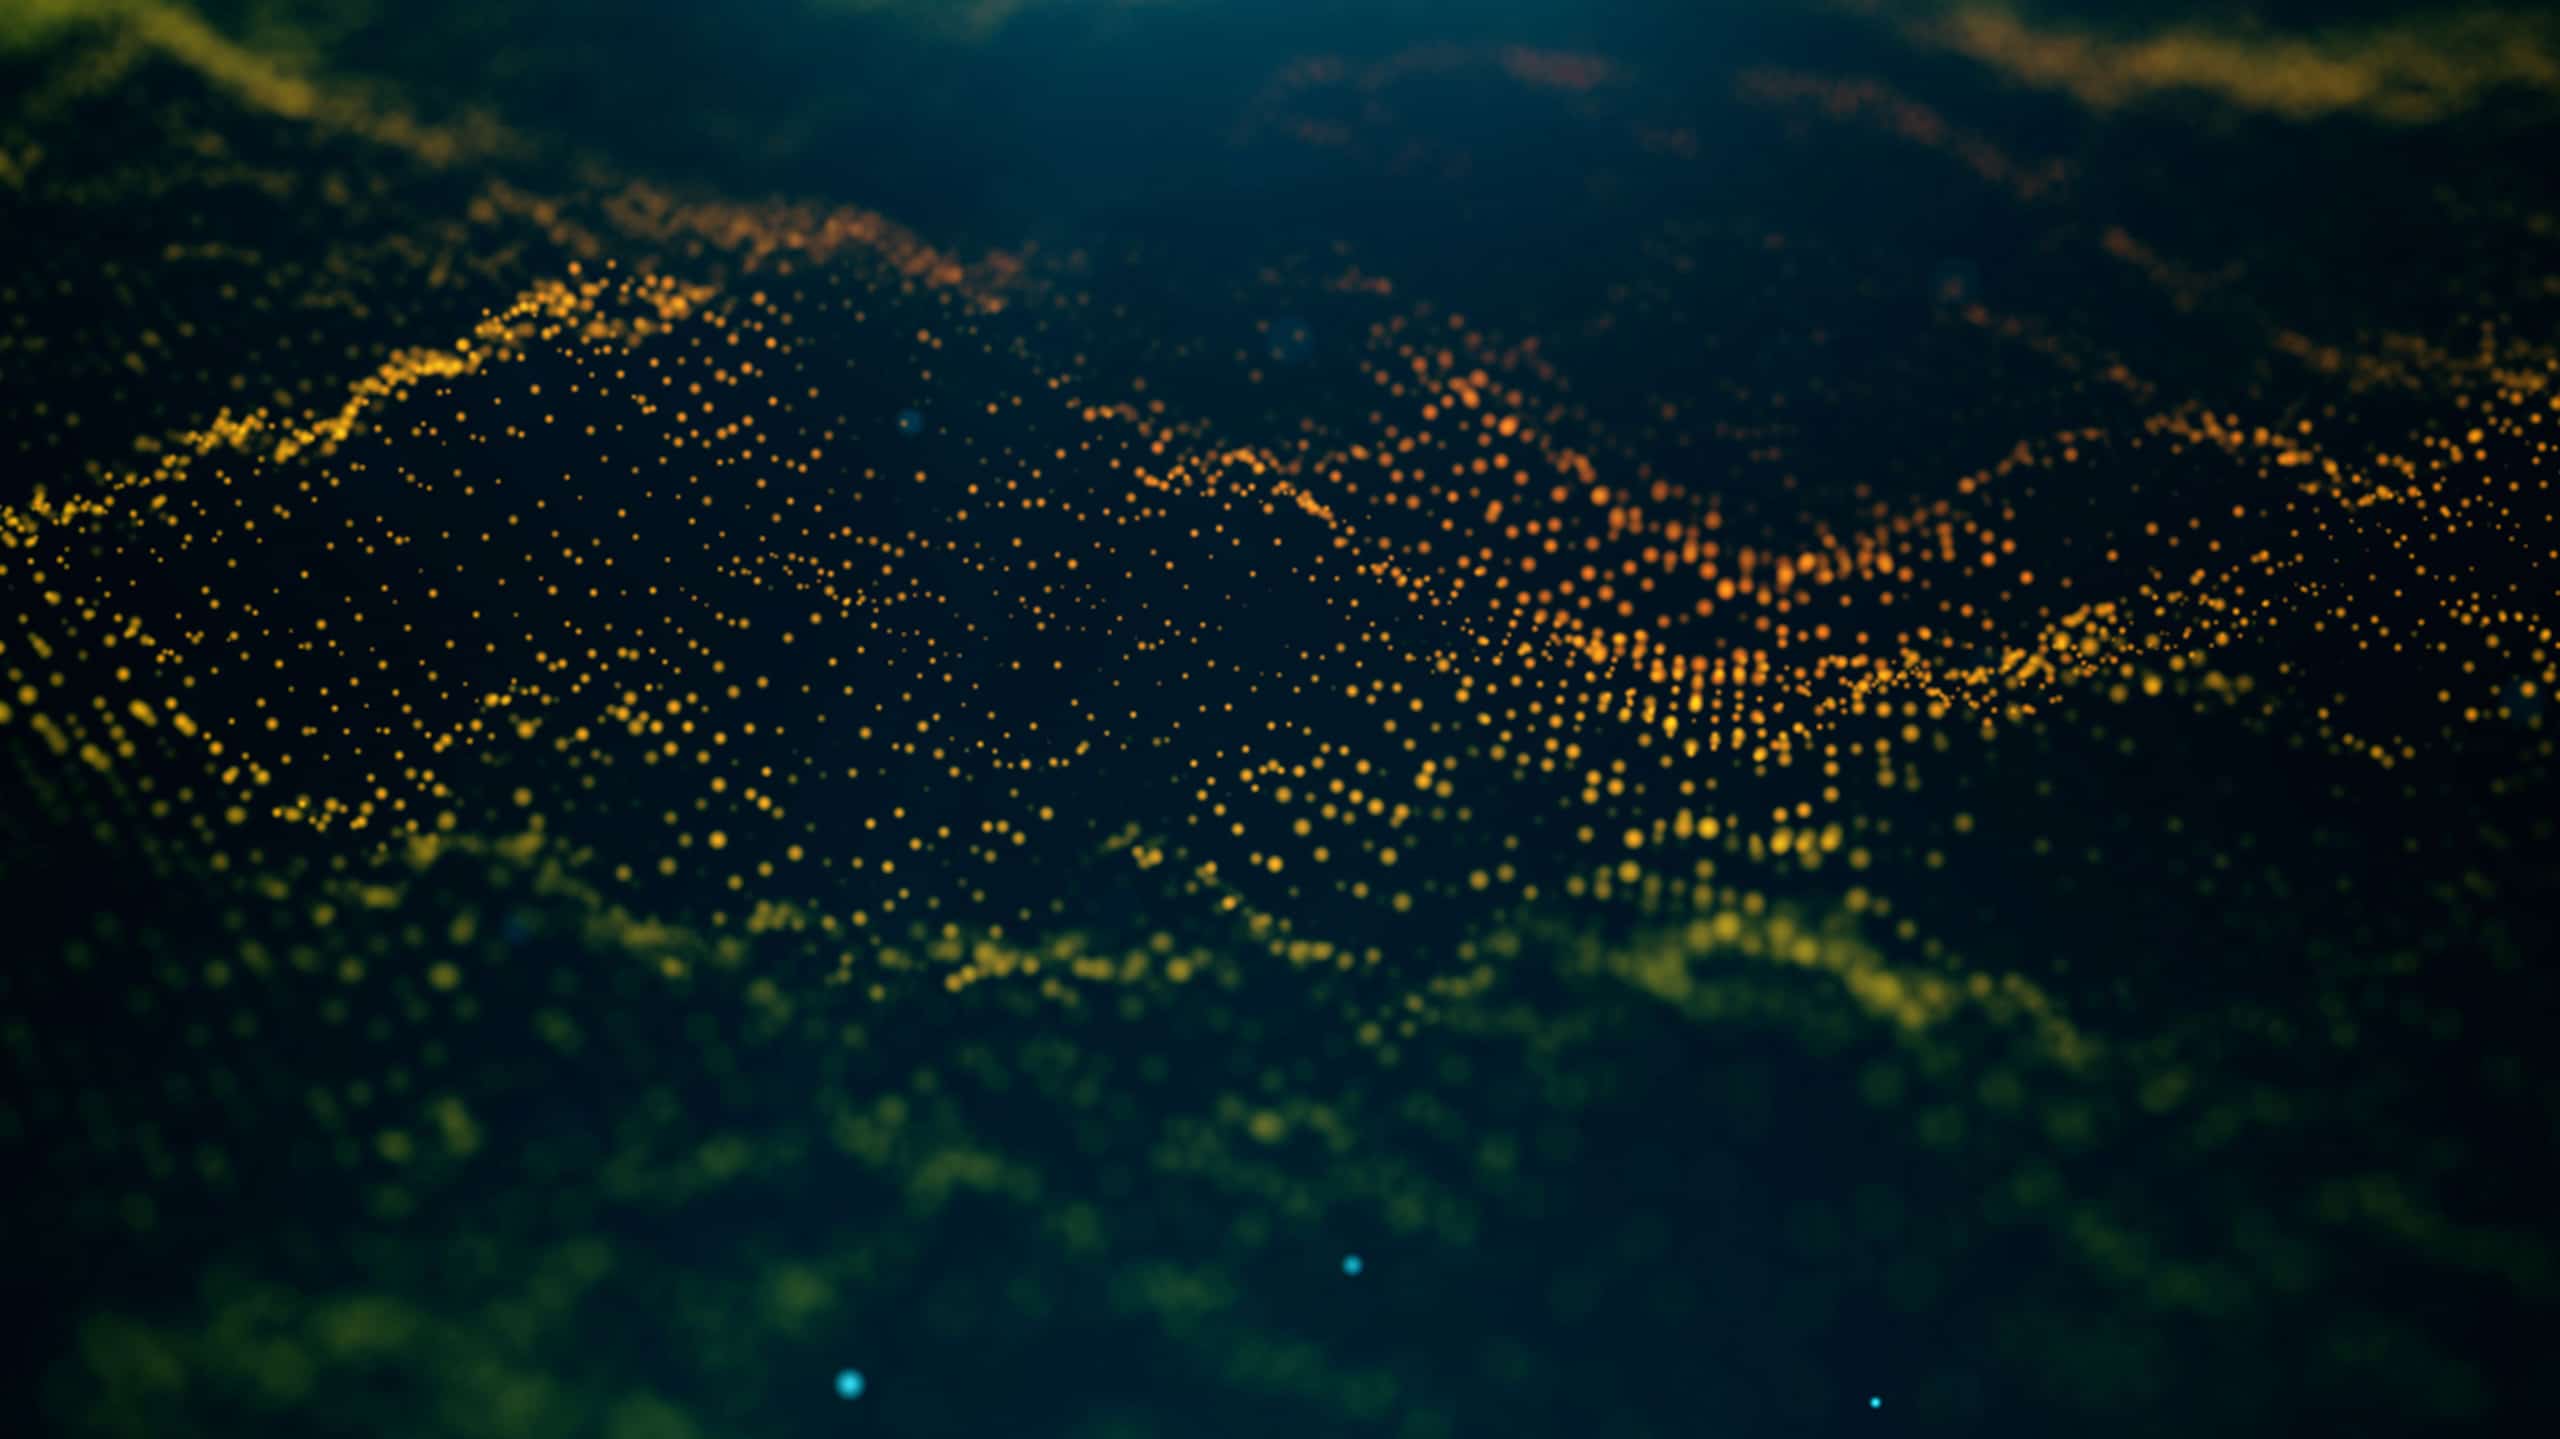 A digital image depicting a glowing grid landscape with yellow and orange lights, resembling a night view of a densely populated area or a complex data network from above.